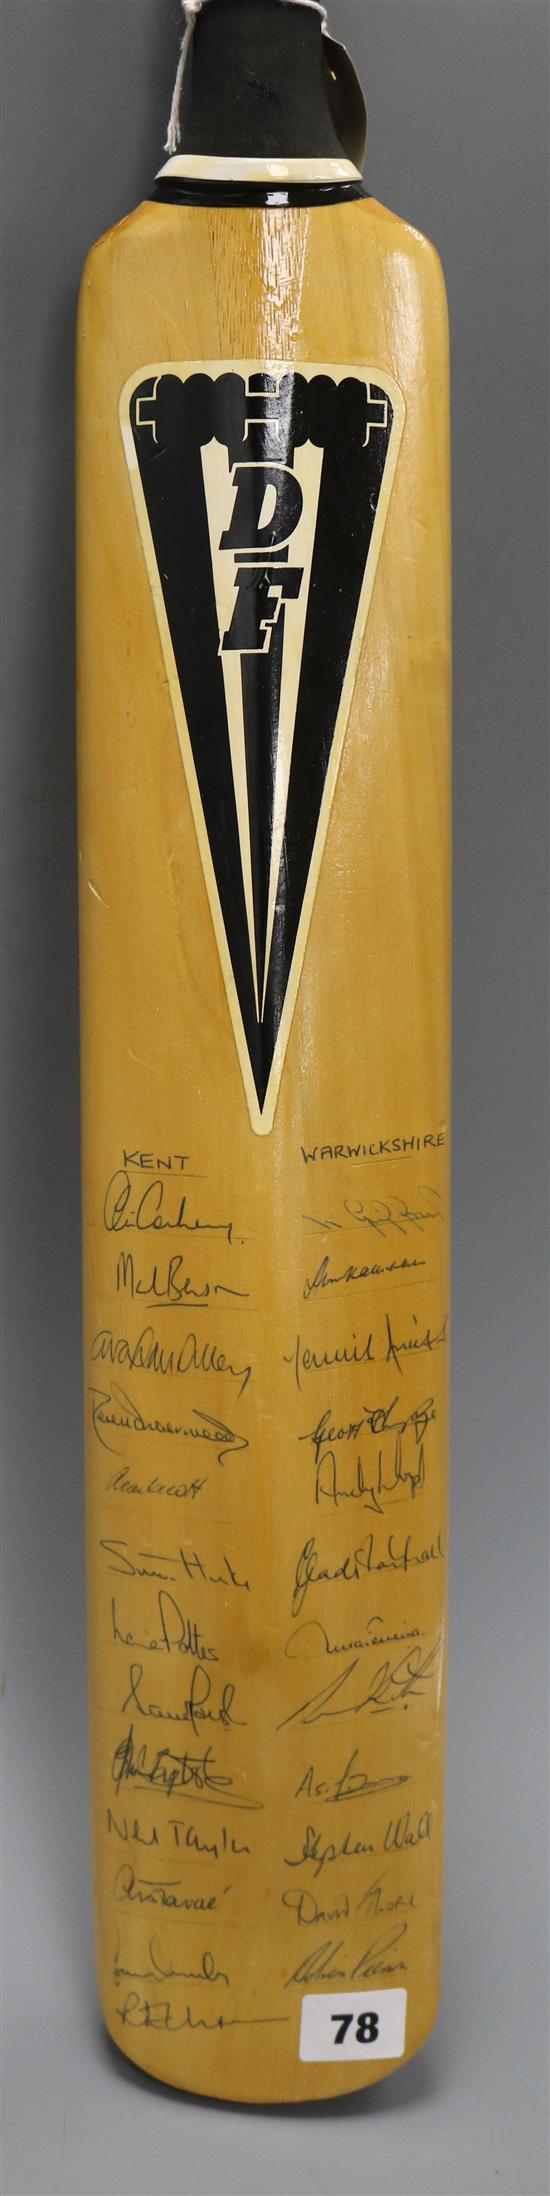 Derek Underwood Benefit year cricket bat for 1986, signed by members of the Australian, English, Kent and Warwickshire teams